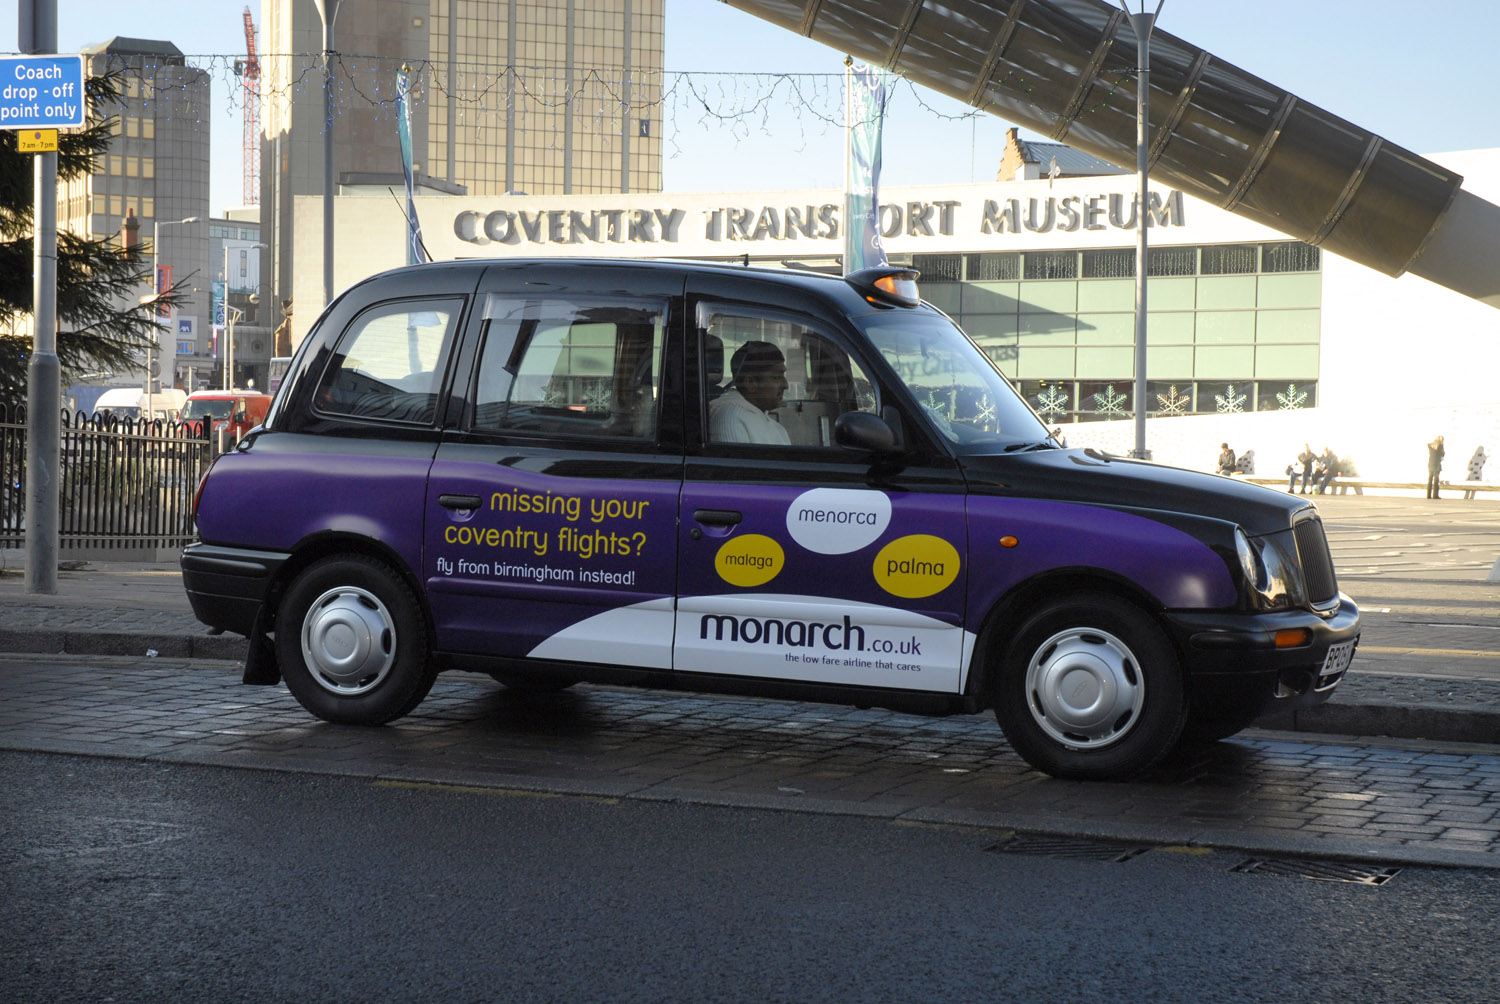 2008 Ubiquitous taxi advertising campaign for Monarch - The low fare airline that cares